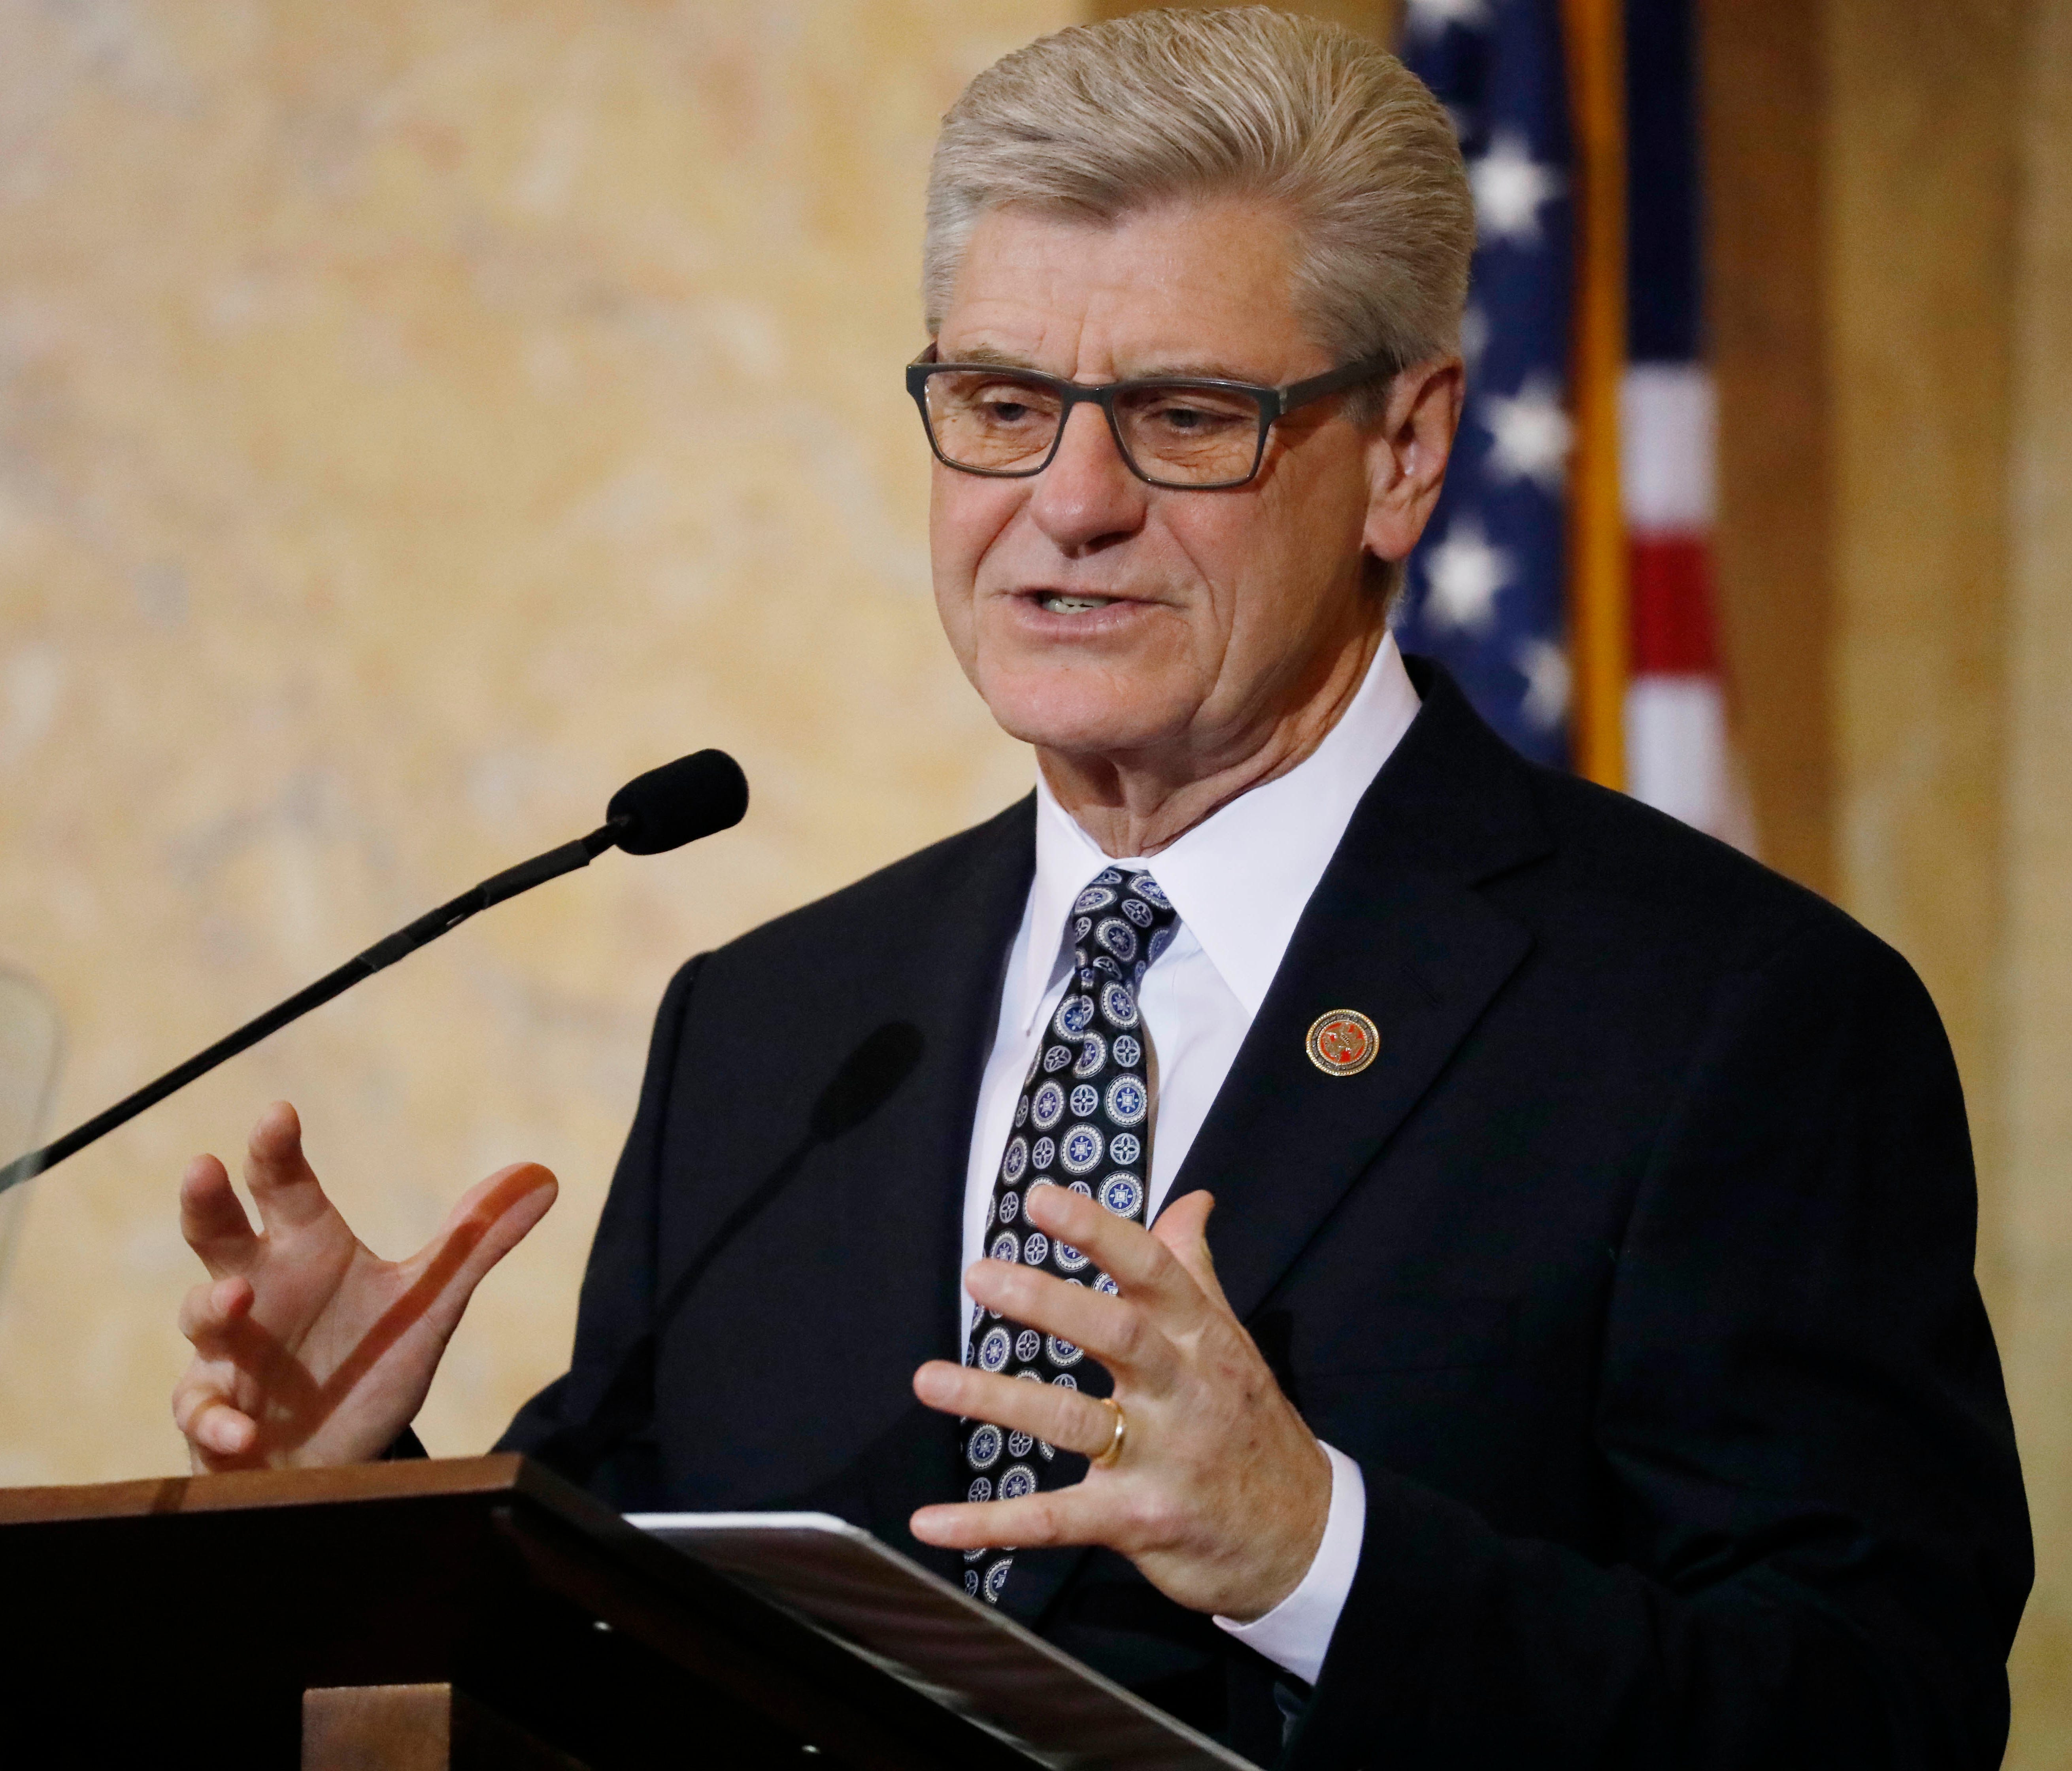 Gov. Phil Bryant outlines his legislative priorities during the State of the State address, Tuesday, Jan. 9, 2018, in House Chambers at the Capitol in Jackson, Miss.